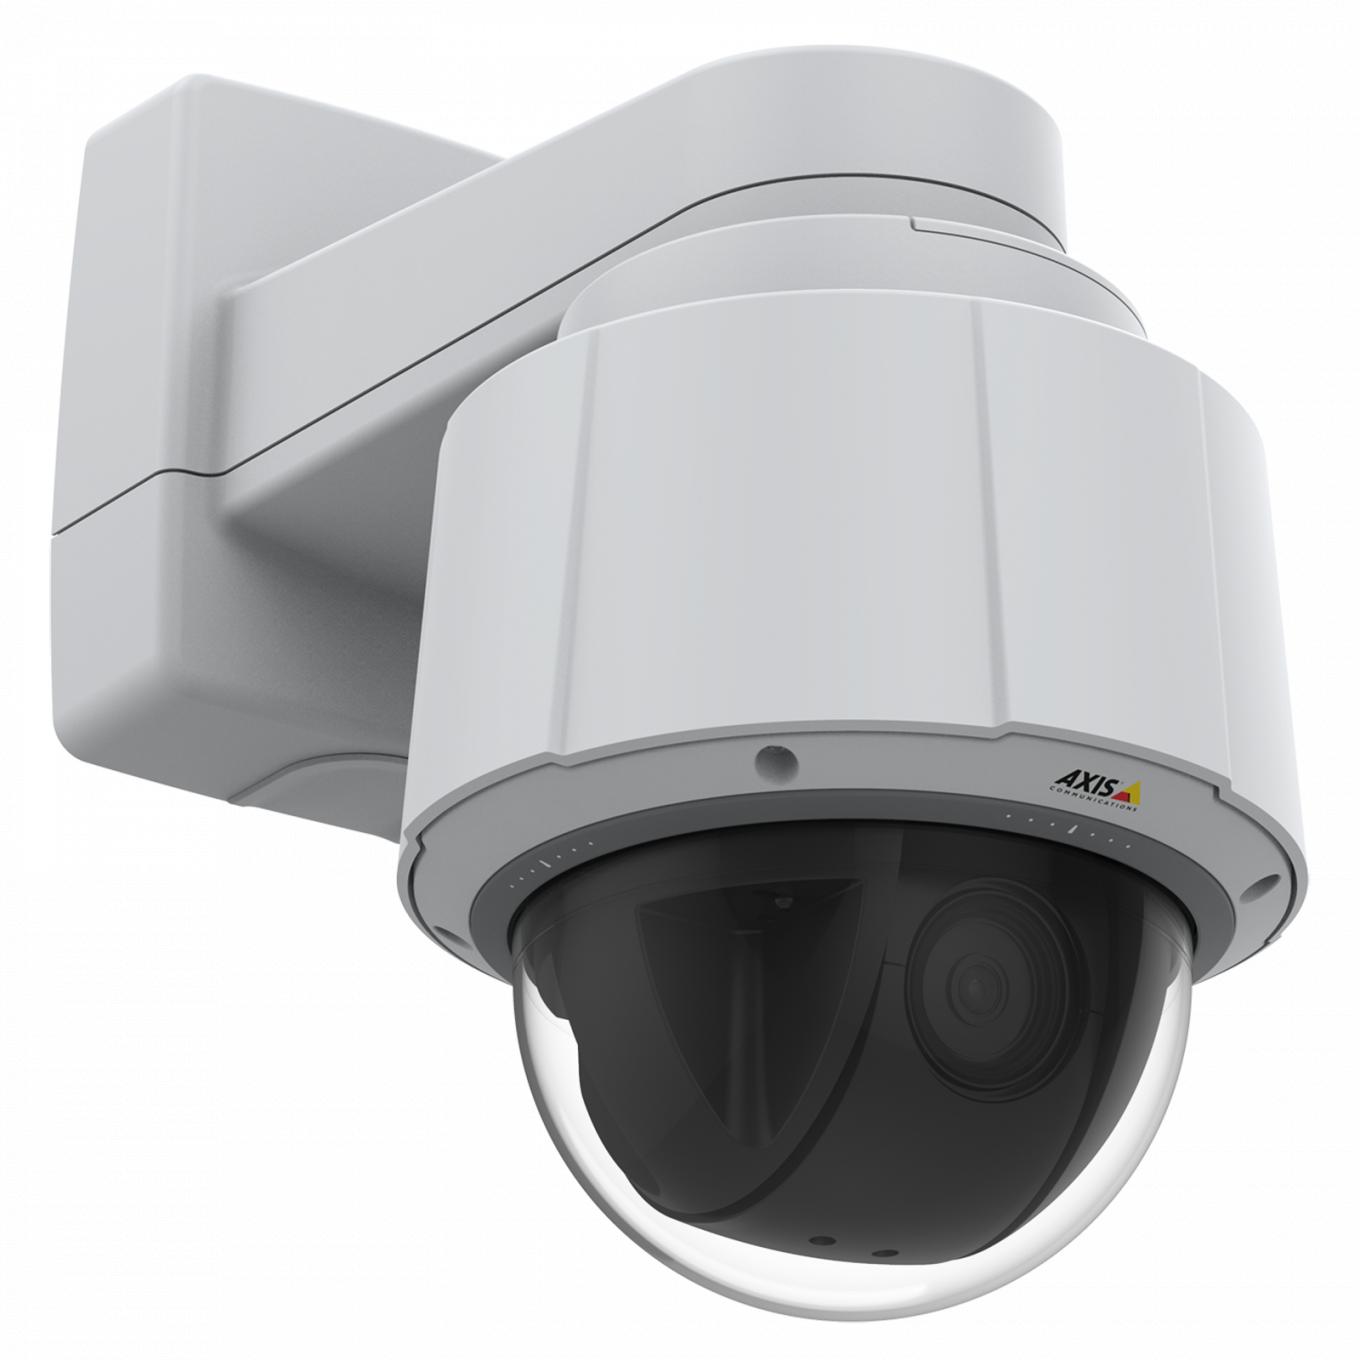 Axis IP Camera Q6074 has Axis Lightfinder 2.0 and Built-in analytics